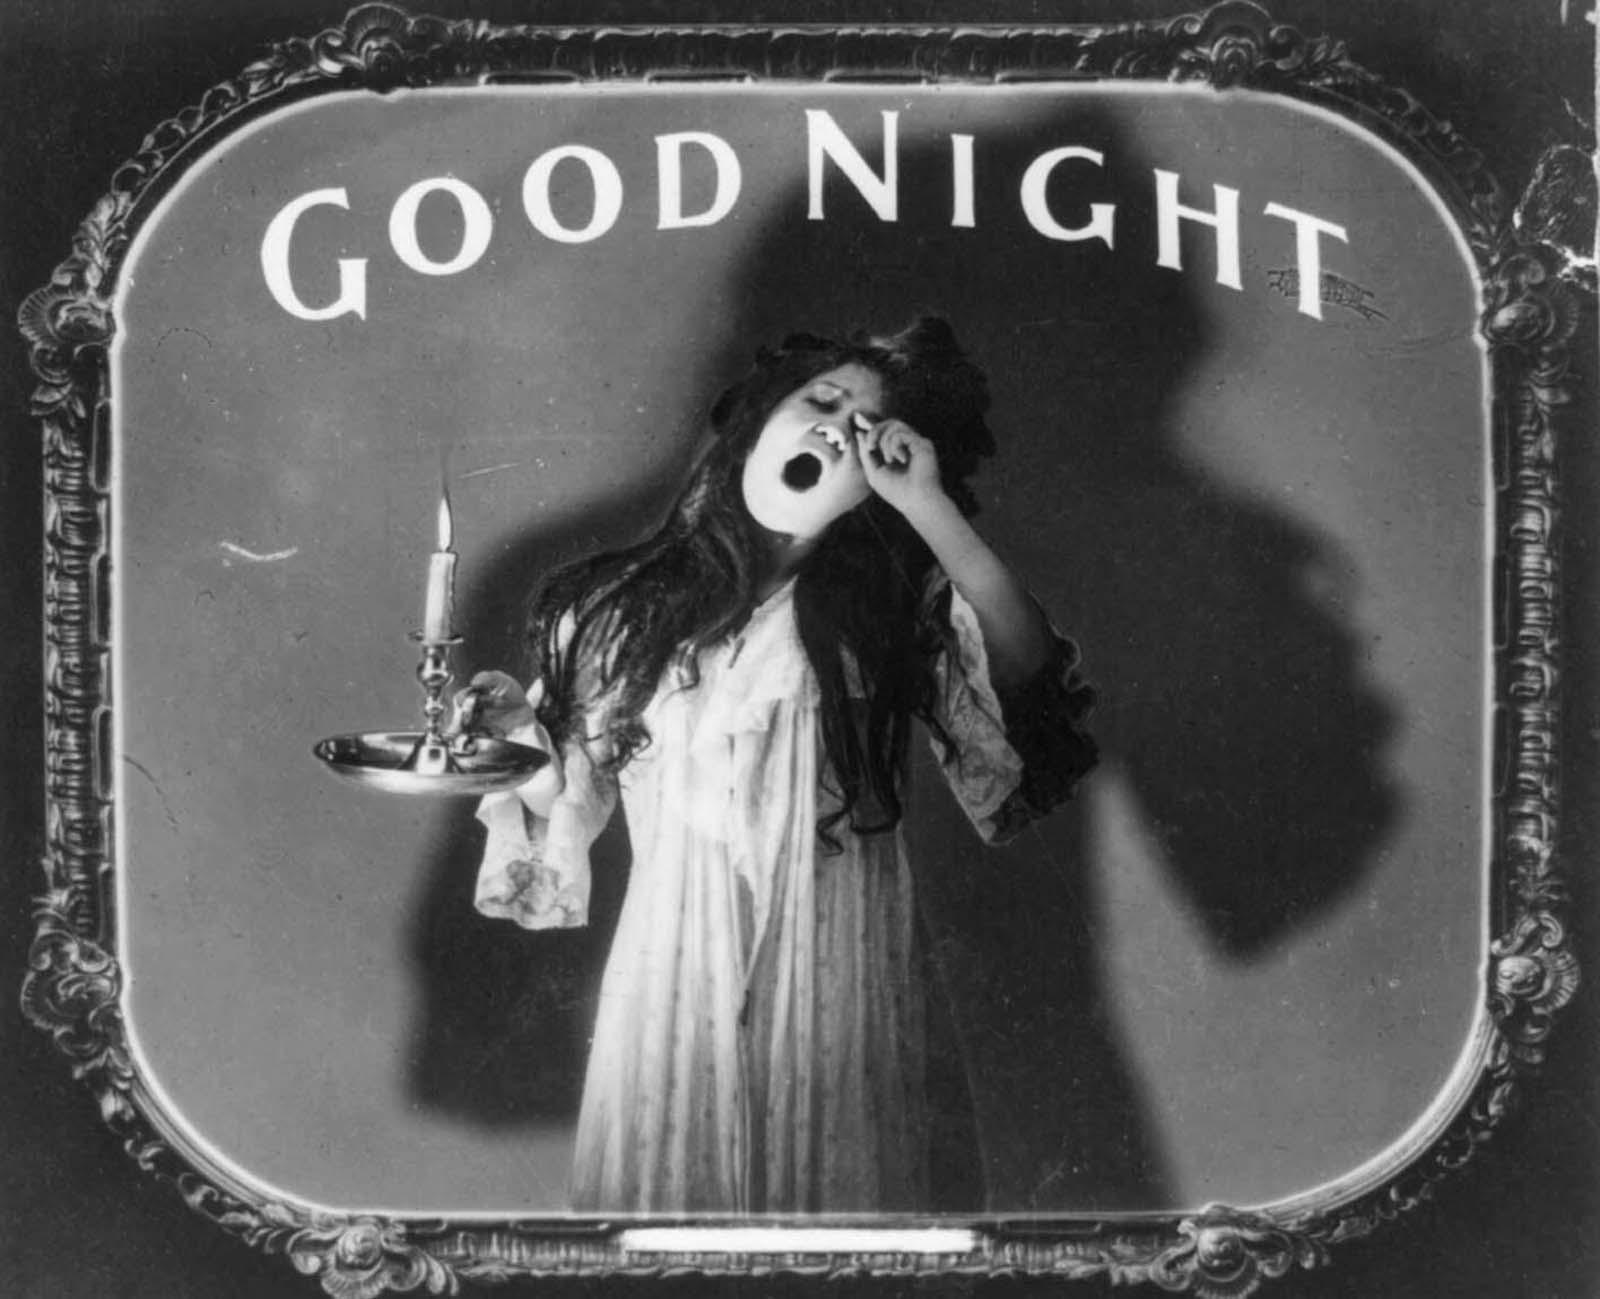 This slider was used at the end of the silent movie and showed a female yawning while holding a candle underneath the message ‘goodnight’